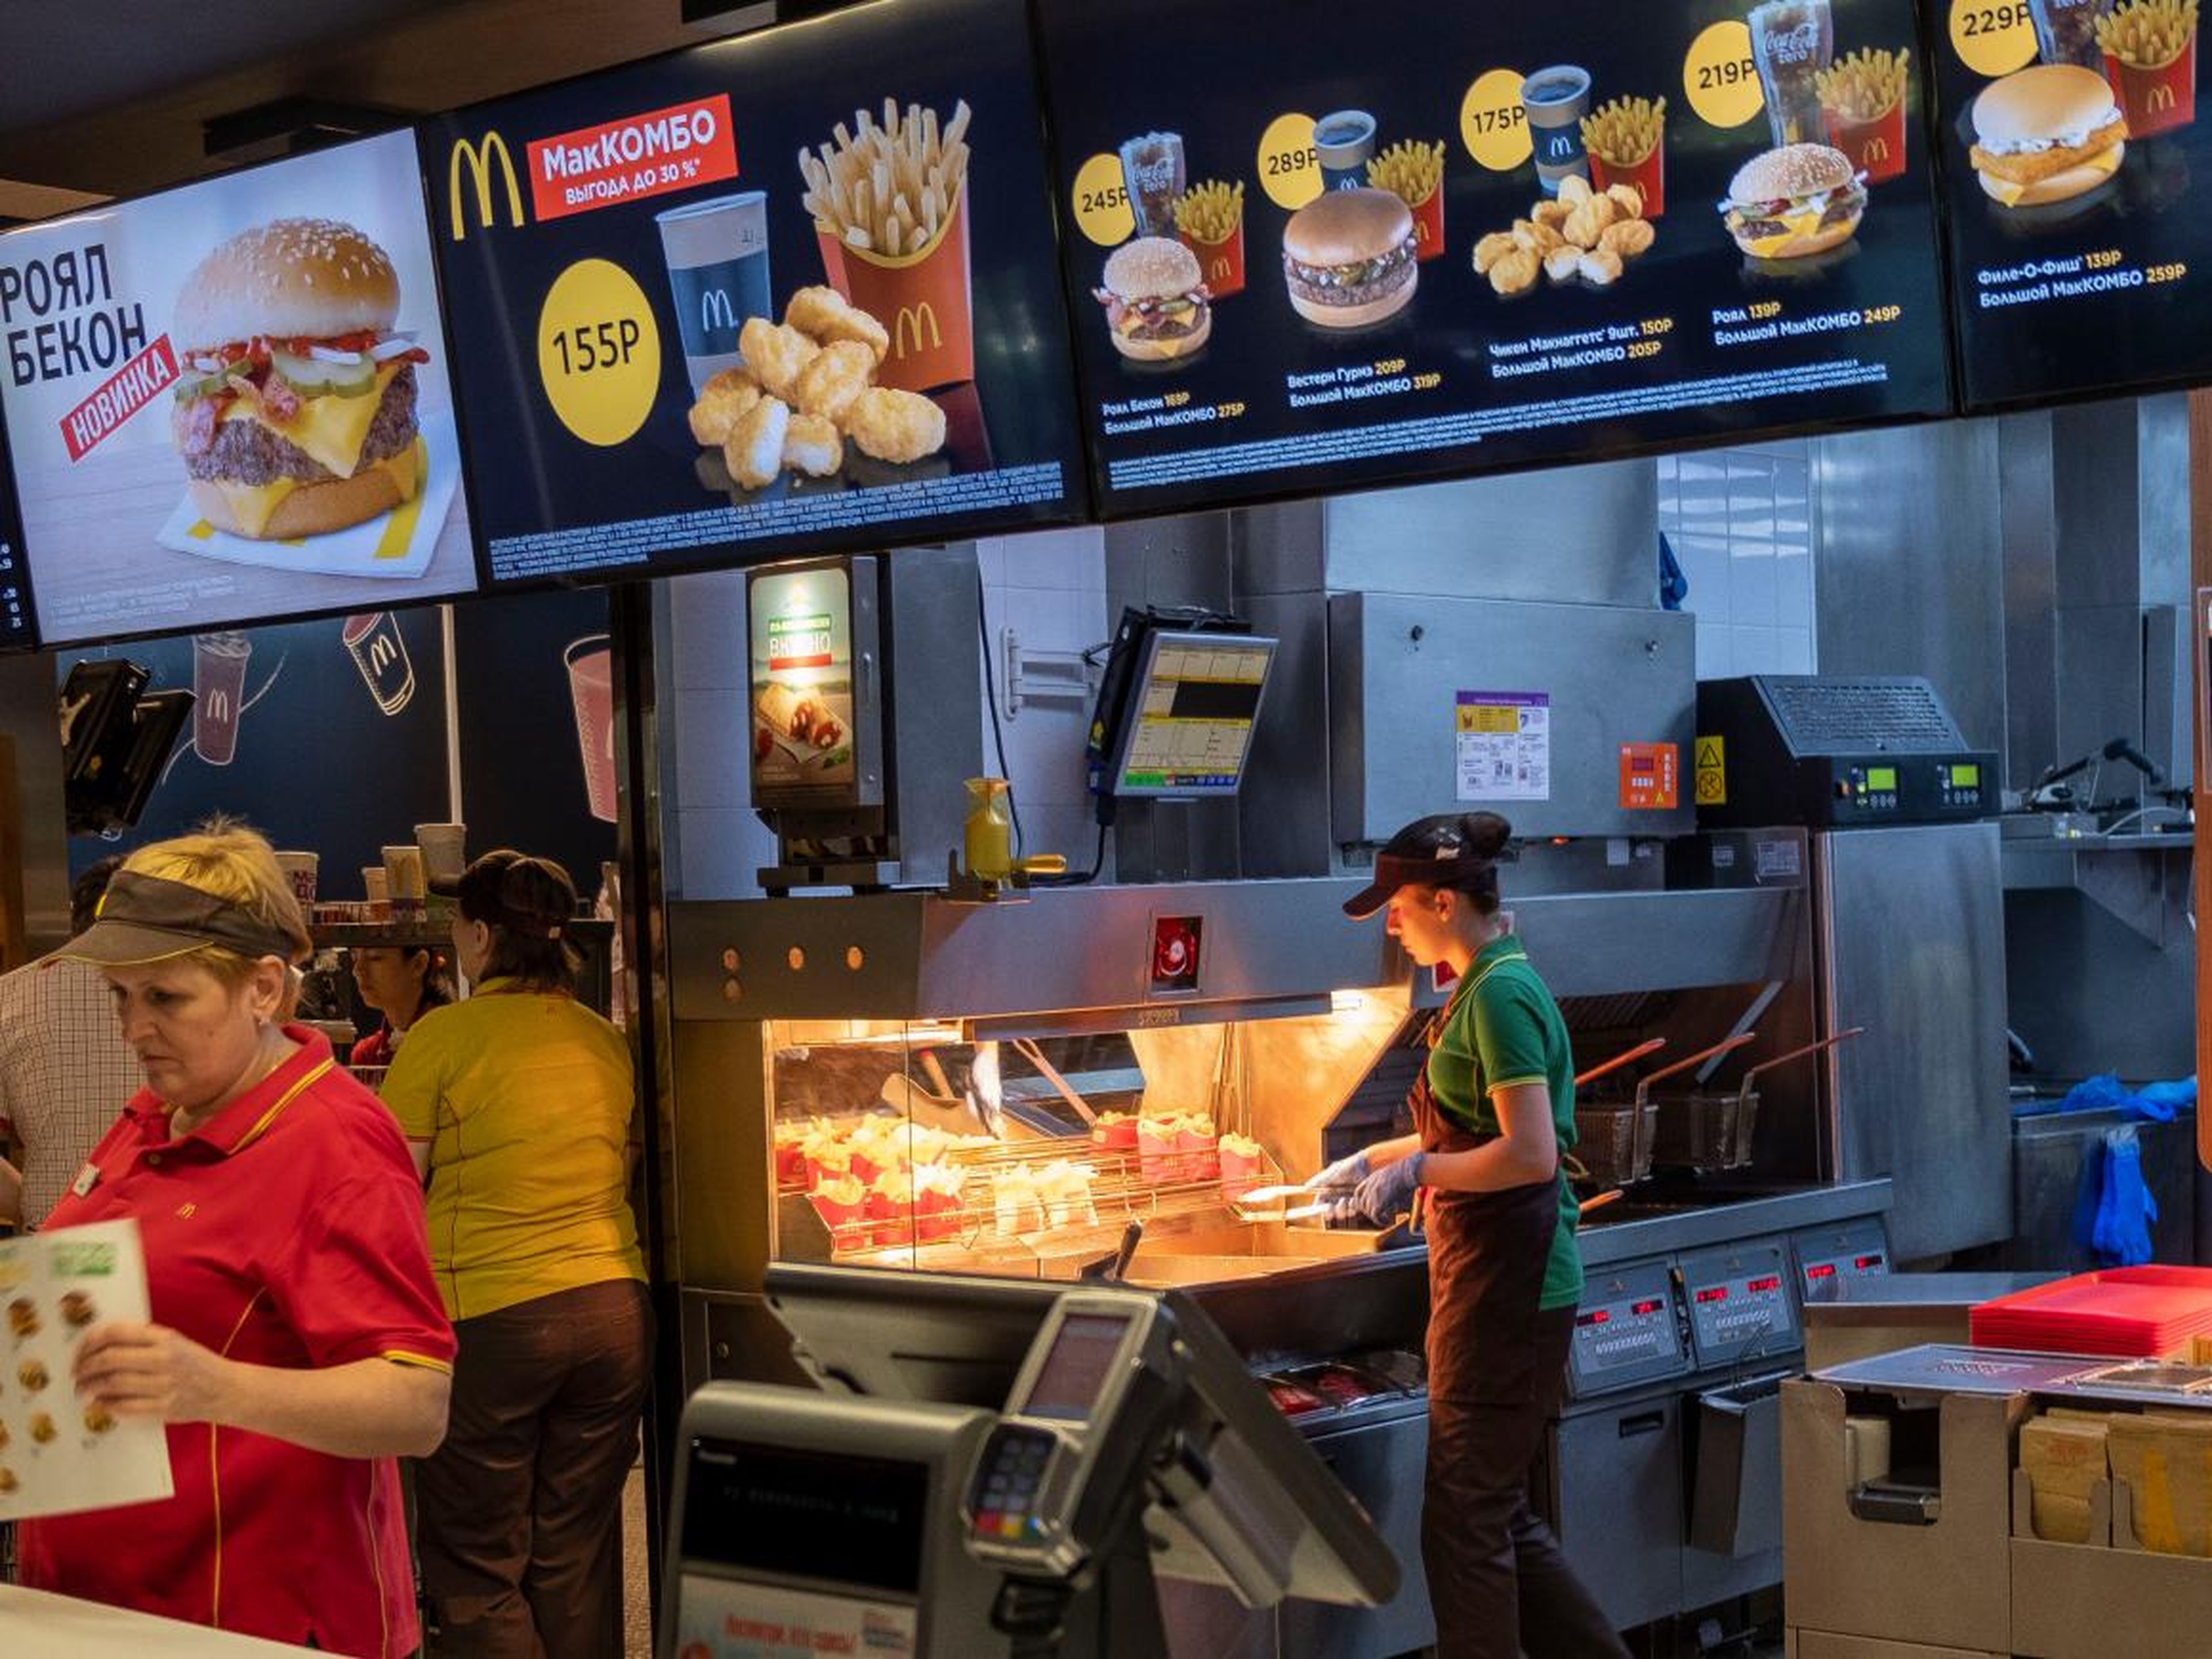 The food at McDonald's in Russia tasted fresher and more flavorful than in the US.